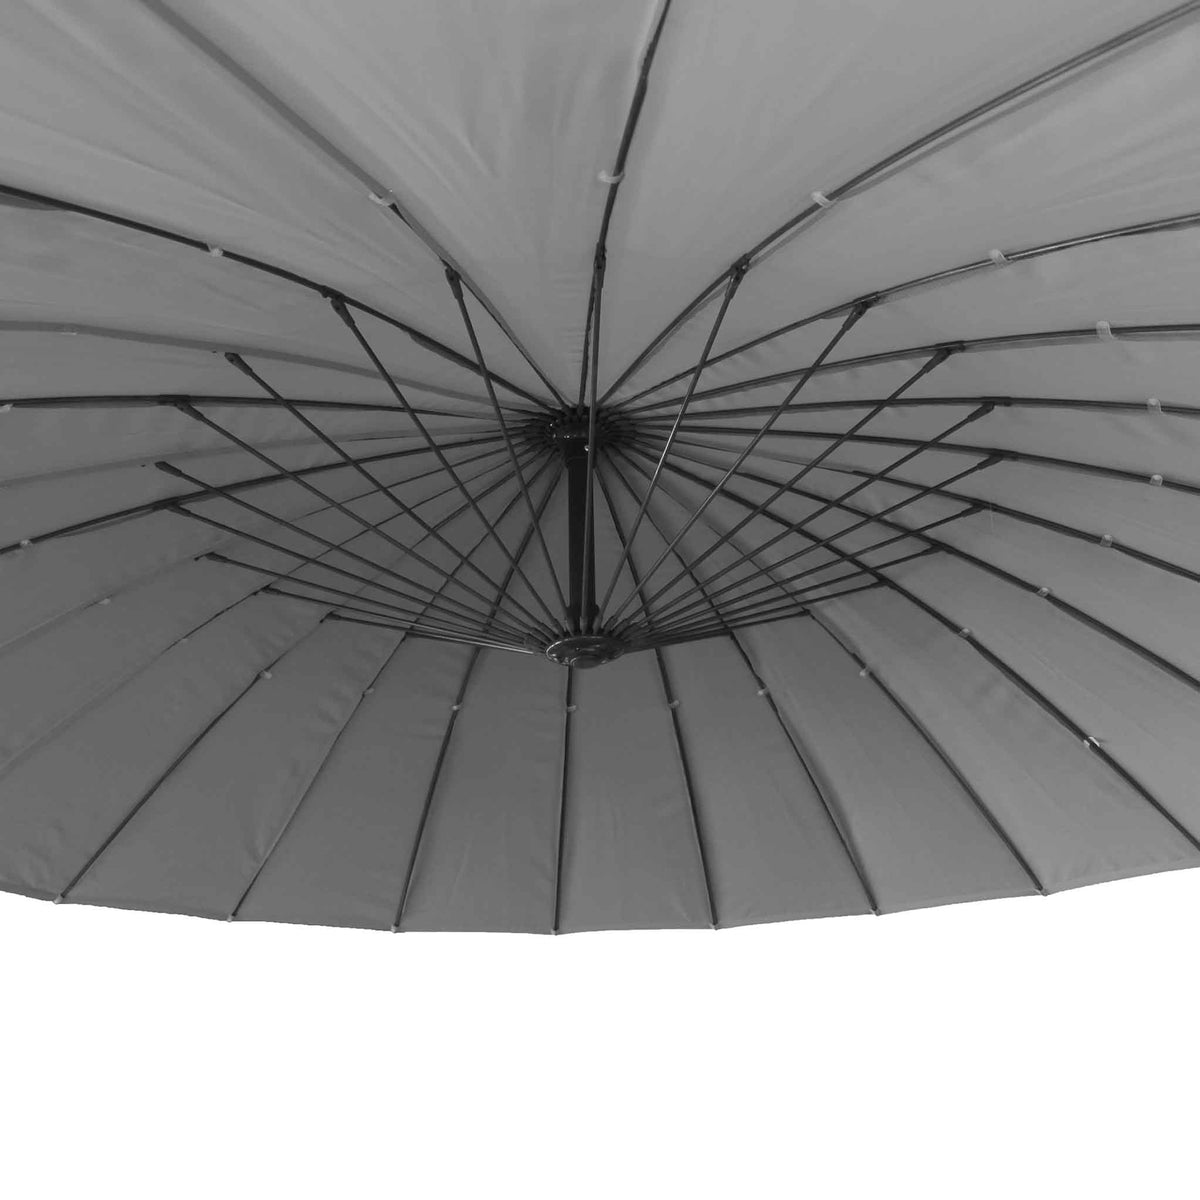 3m Shanghai Cantilever Parasol in Grey - Close up of parasol canopy